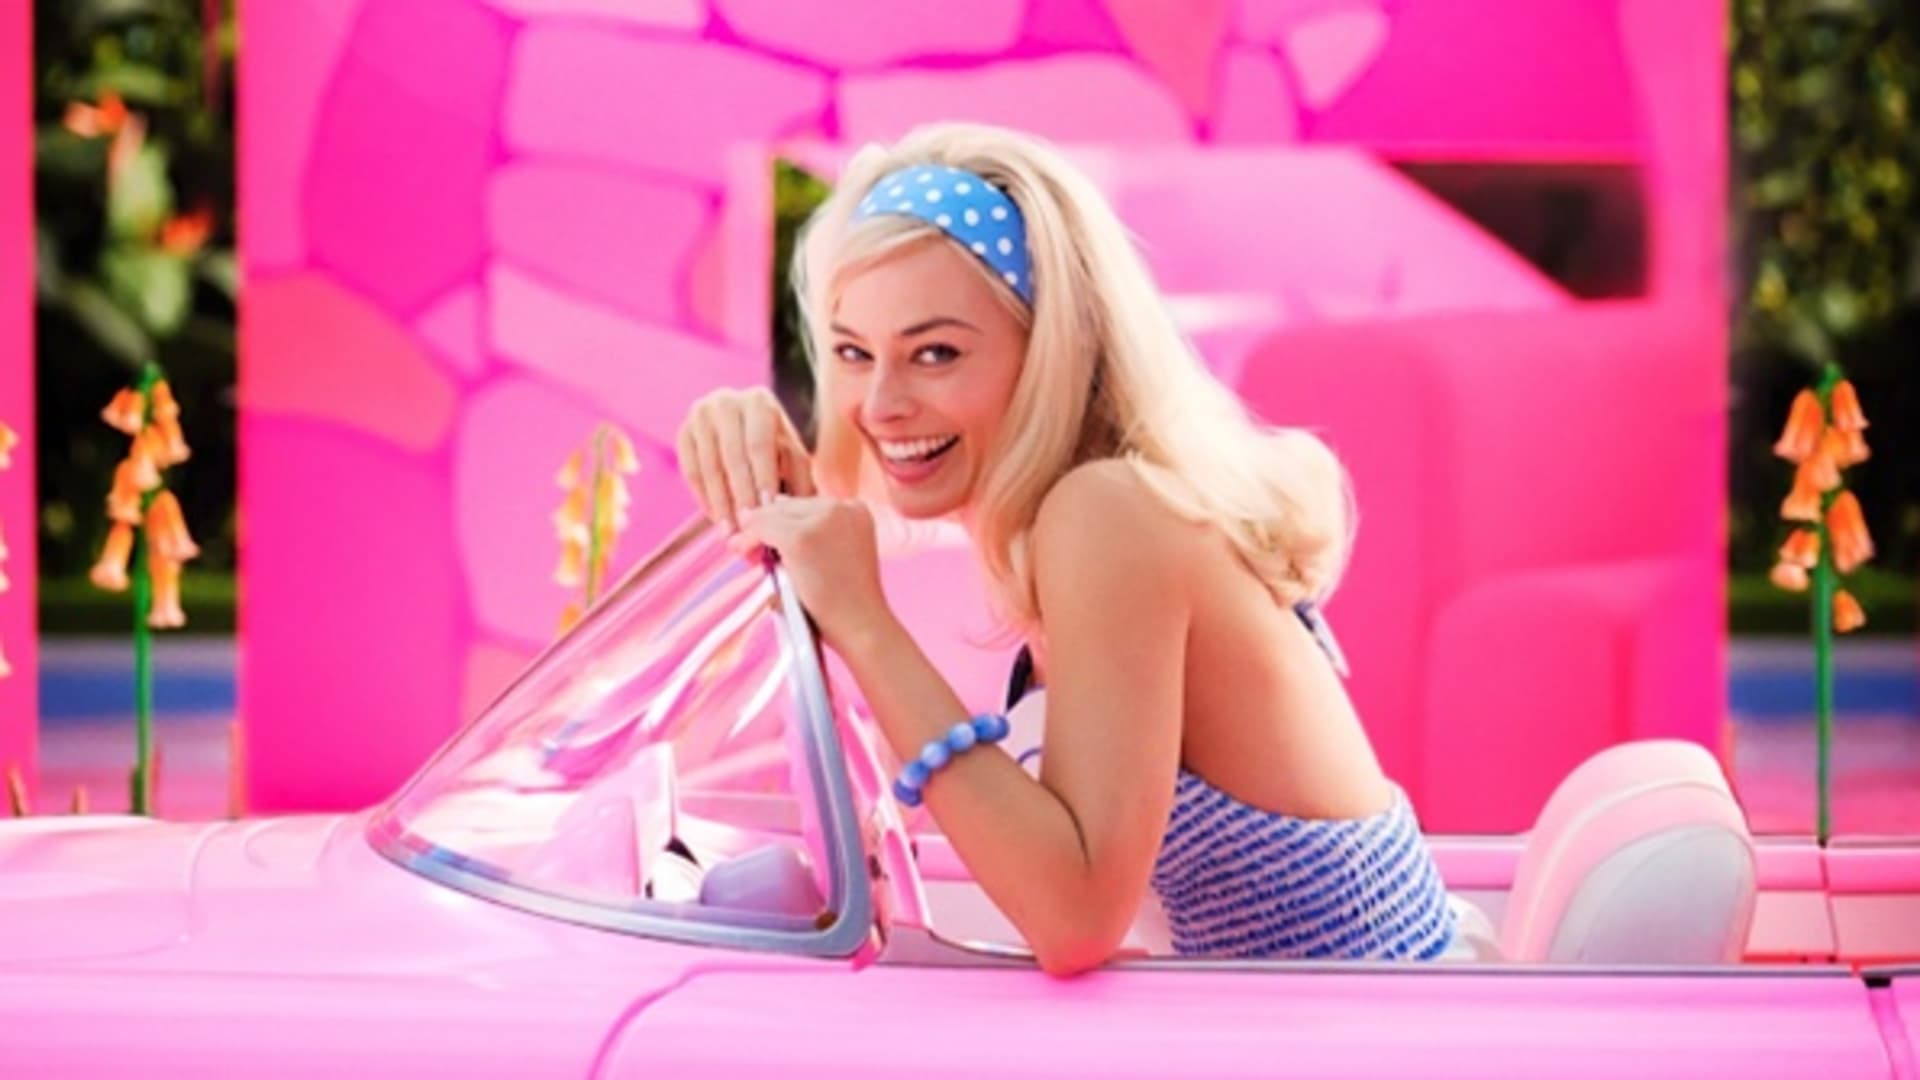 Margot Robbie will star as Barbie in an upcoming movie from Mattel and Warner Bros.